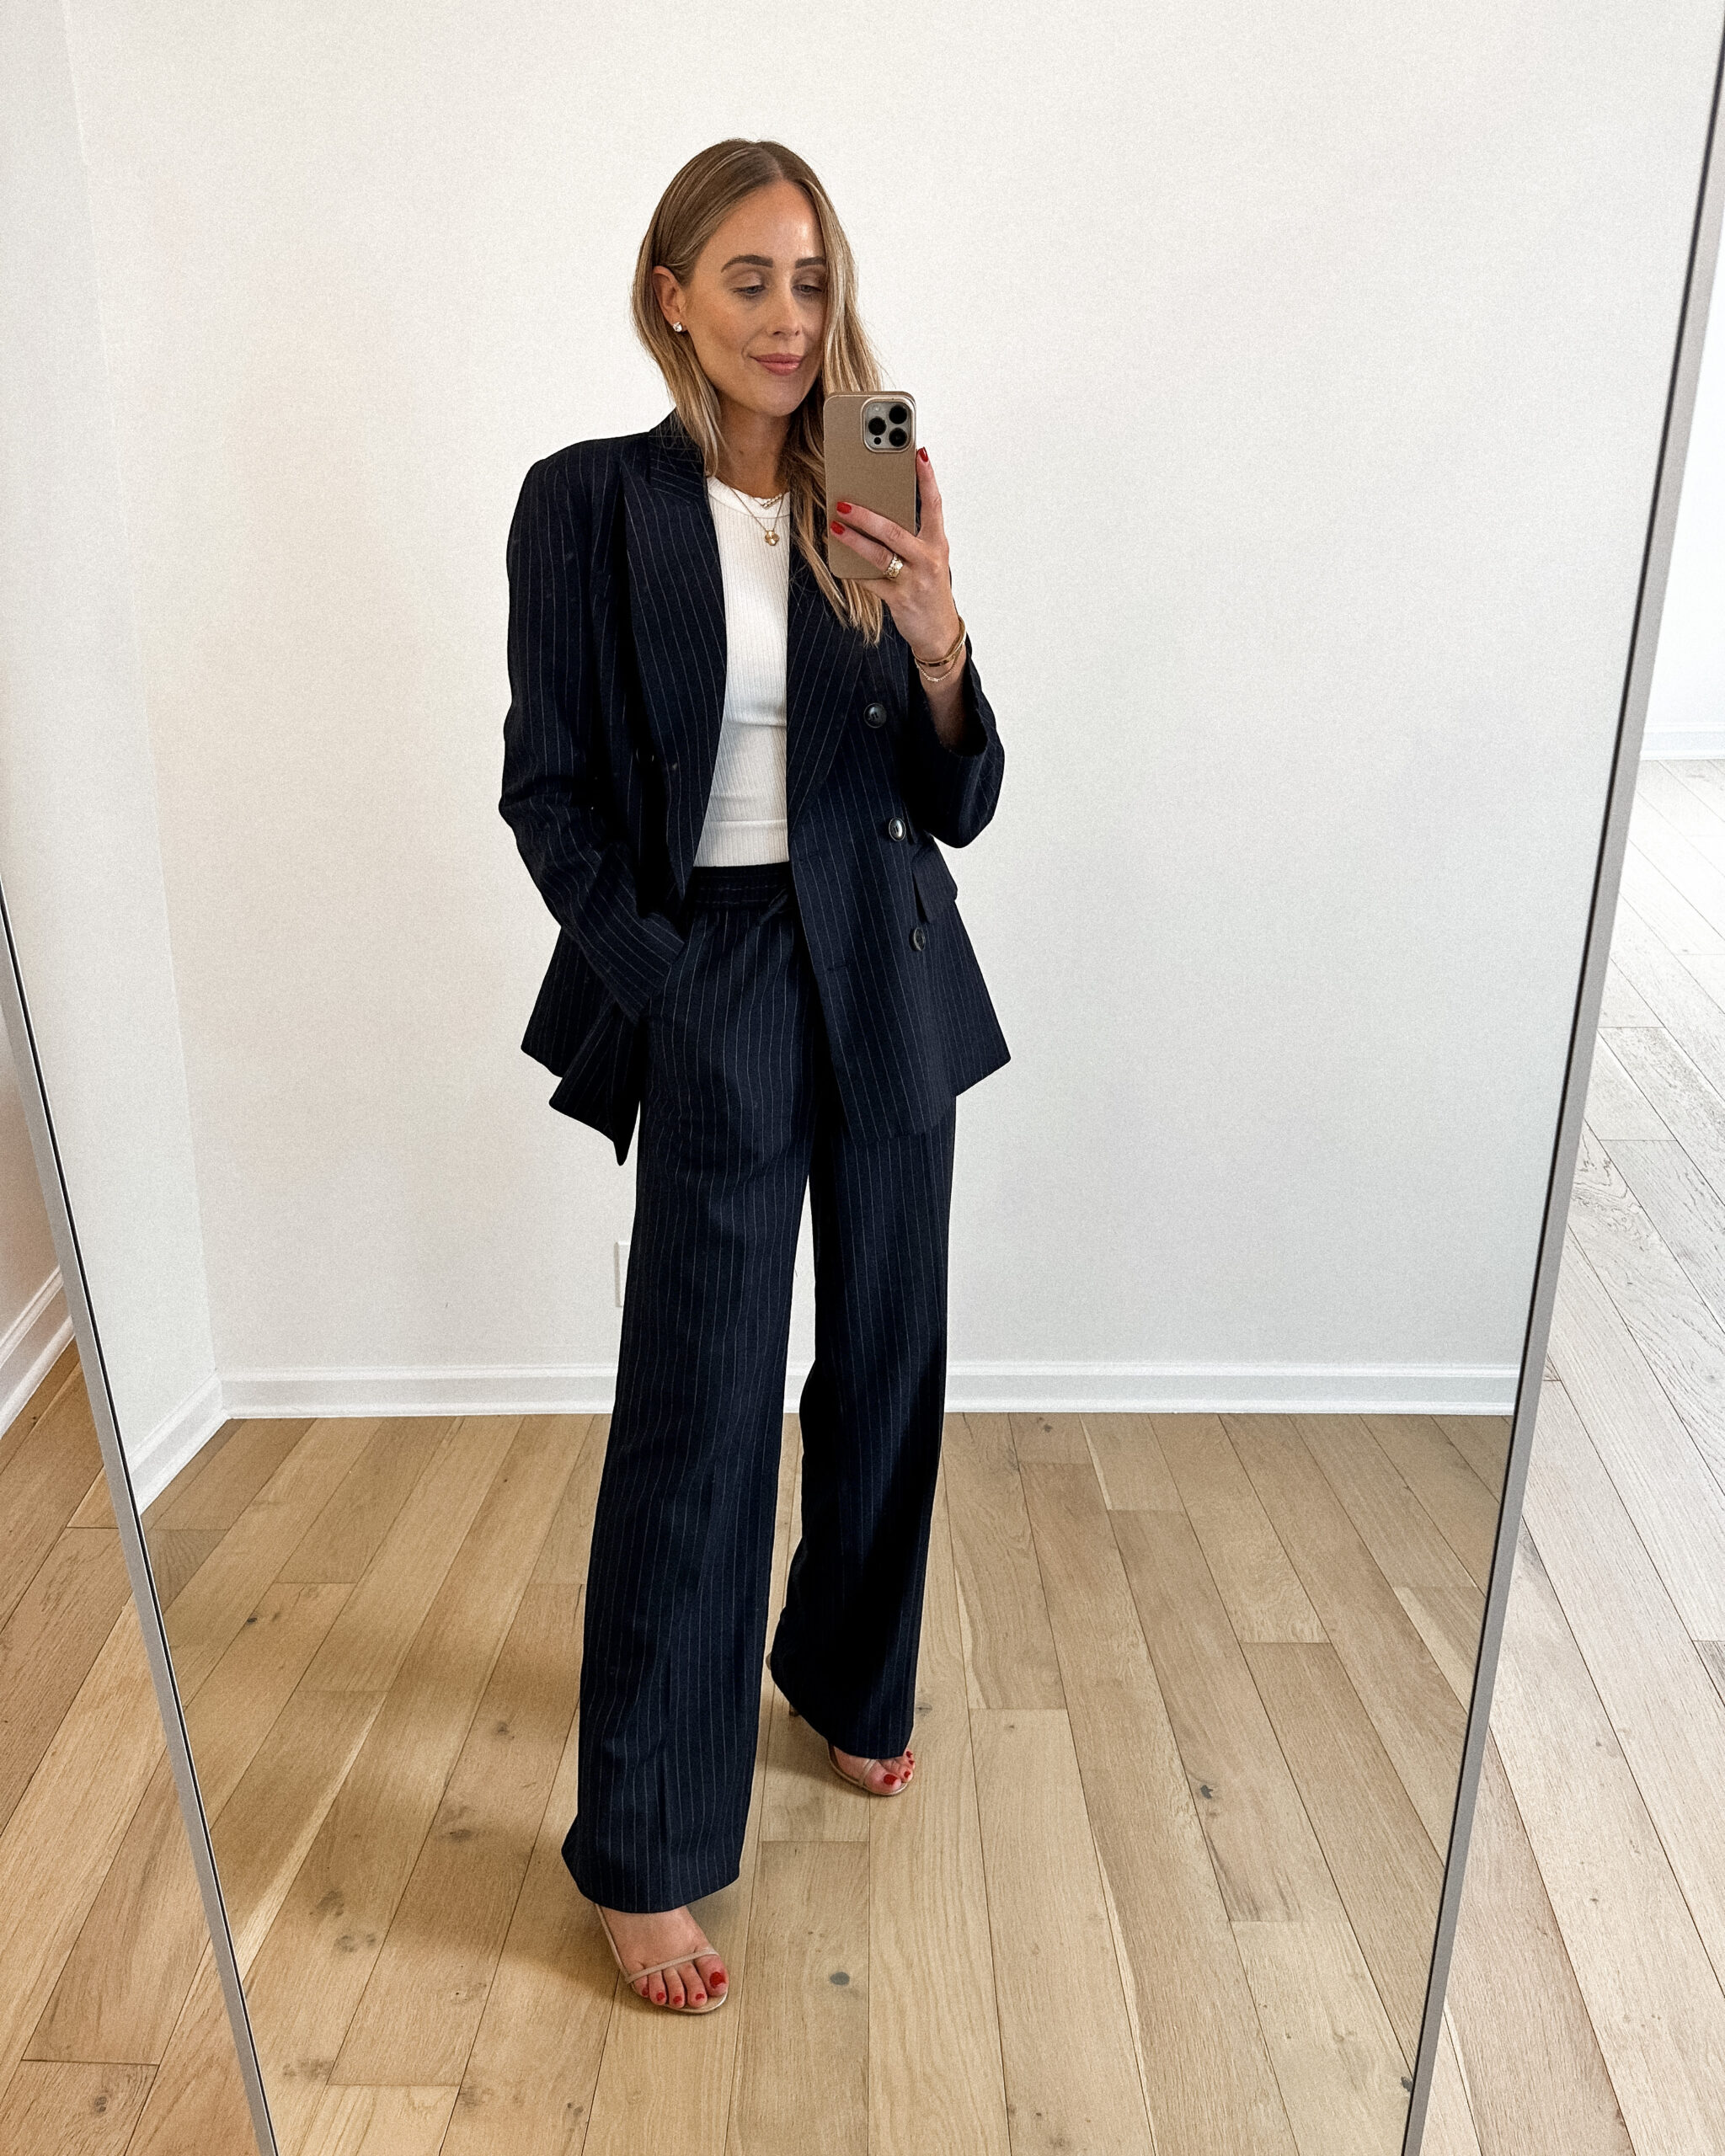 Fashion Jackson Wearing MAYSON the label Navy Pinstripe Double Breasted Blazer, White Tank, Navy Pinstripe Drawstring Pants, Nude Strappy Sandals, Workwear Outfit Idea